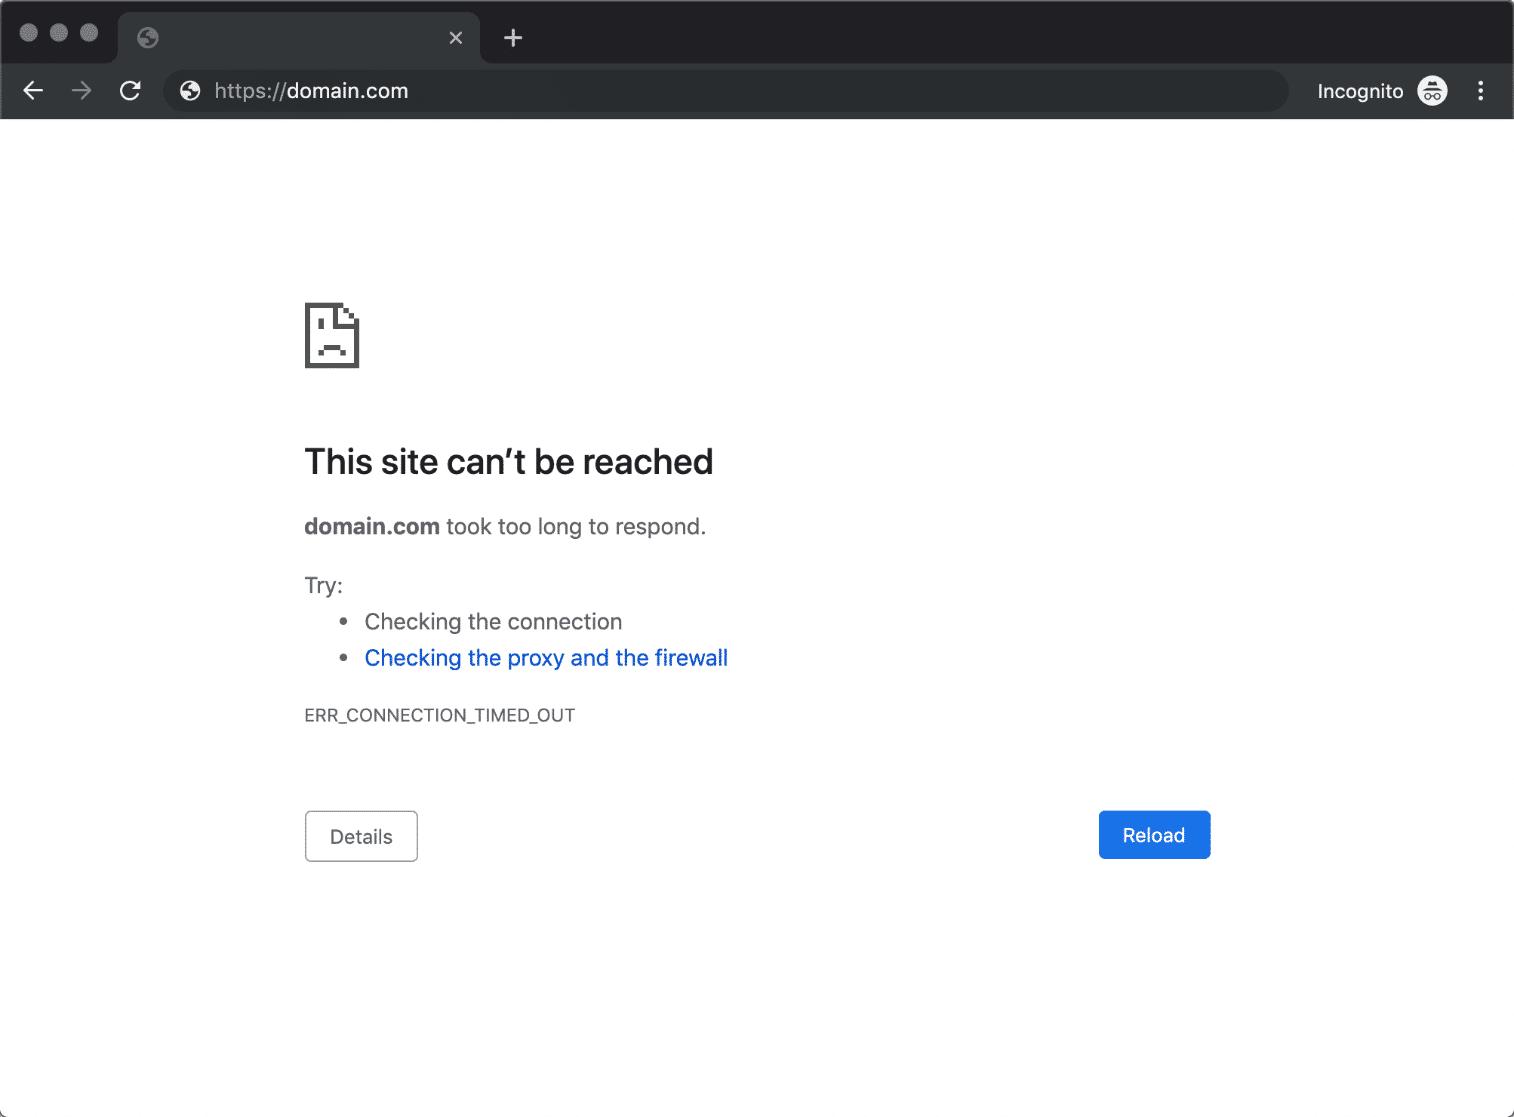 ERR_CONNECTION_TIMED_OUT error in Chrome